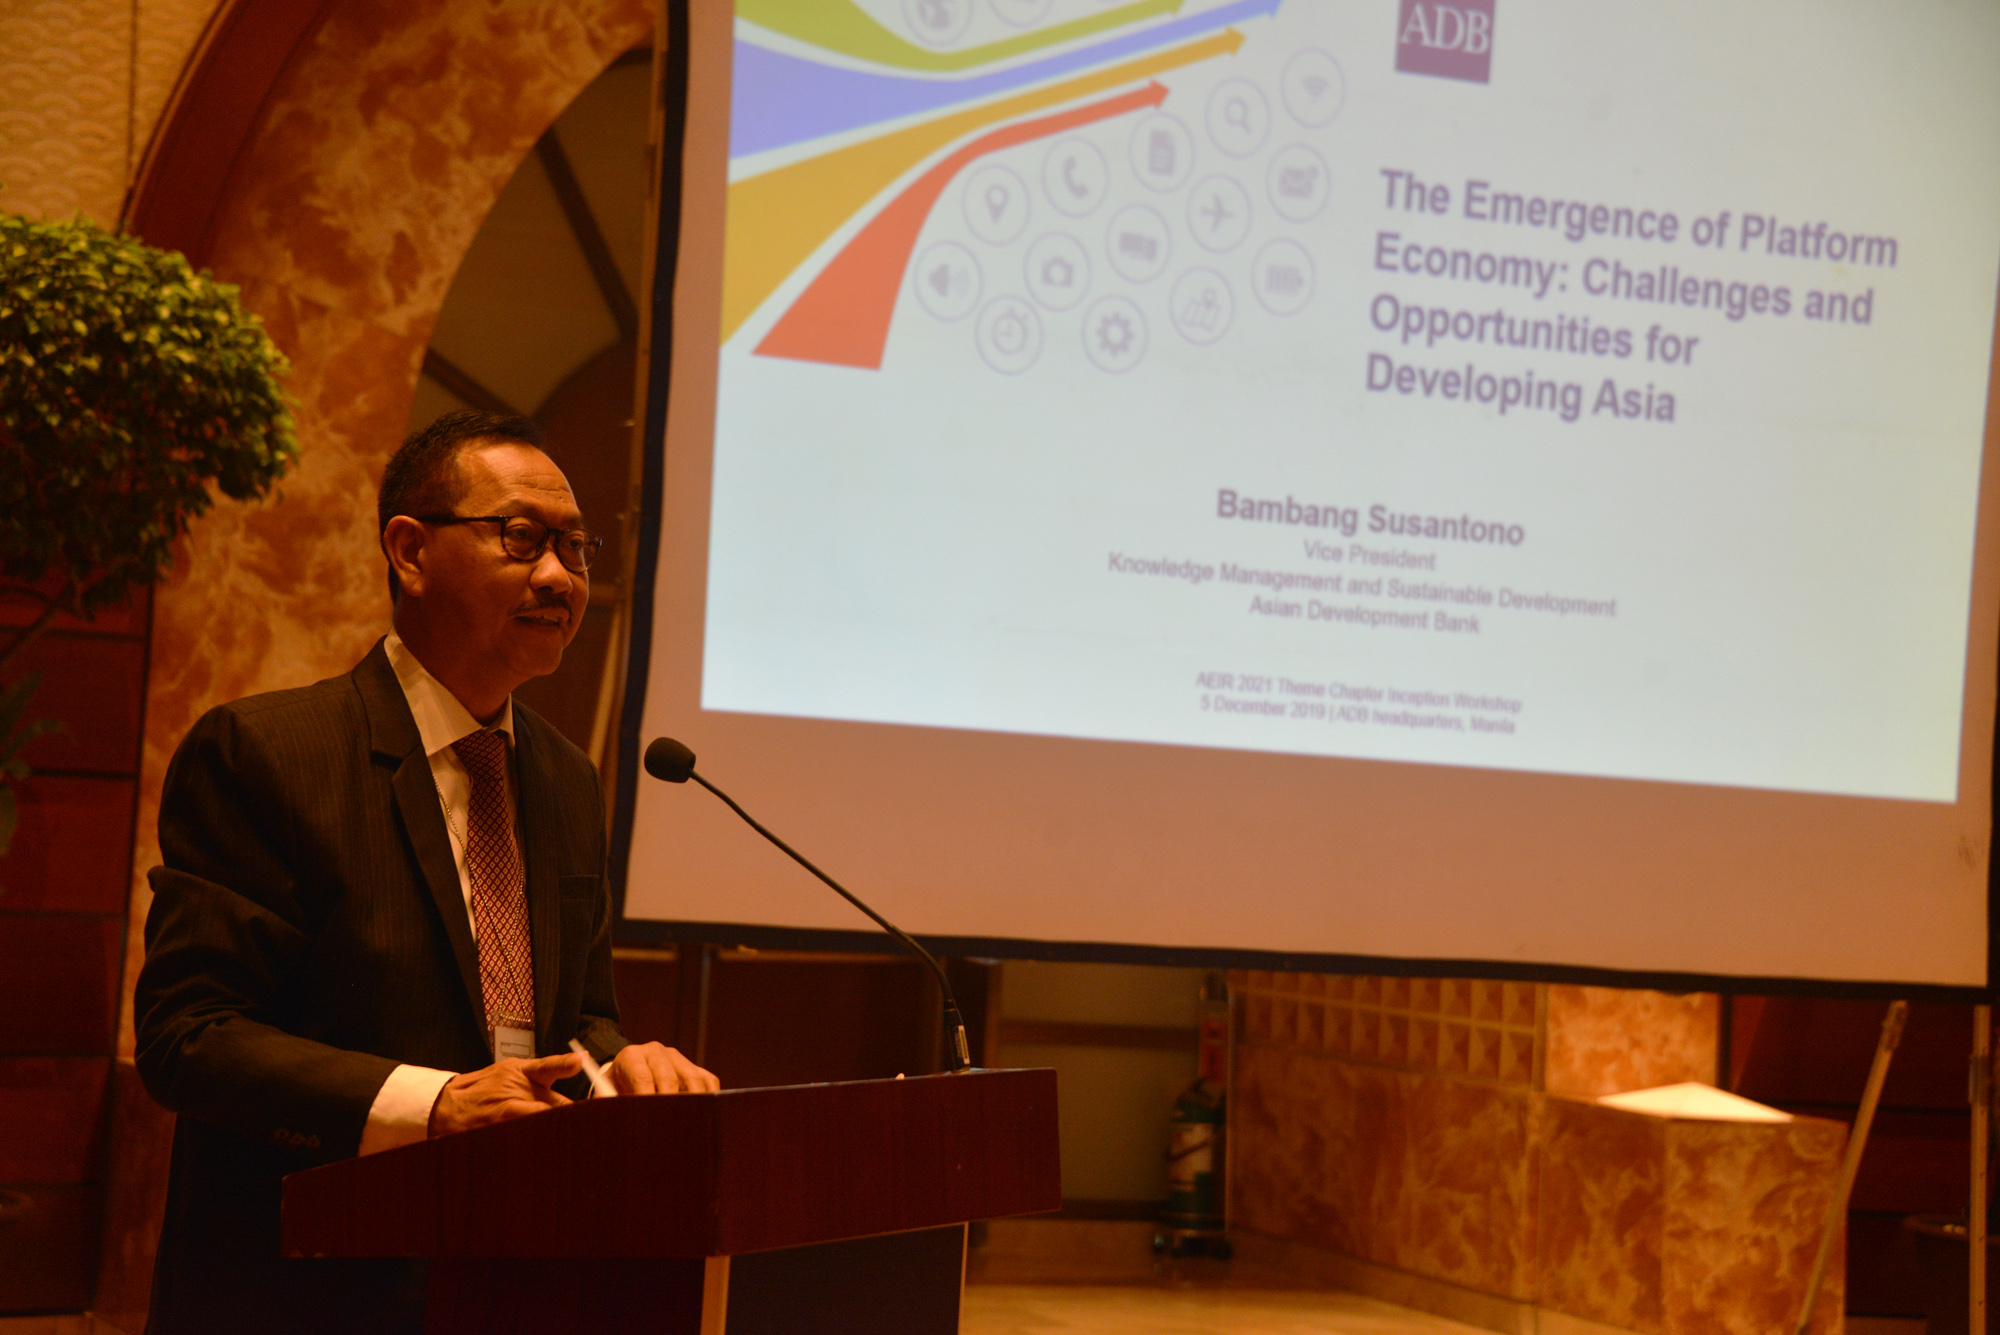 ADB-PIDS-NUS Inception Conference on Challenges and Opportunities for the Platform Economy in Developing Asia-adb-nus-pids-2-20191205.jpg